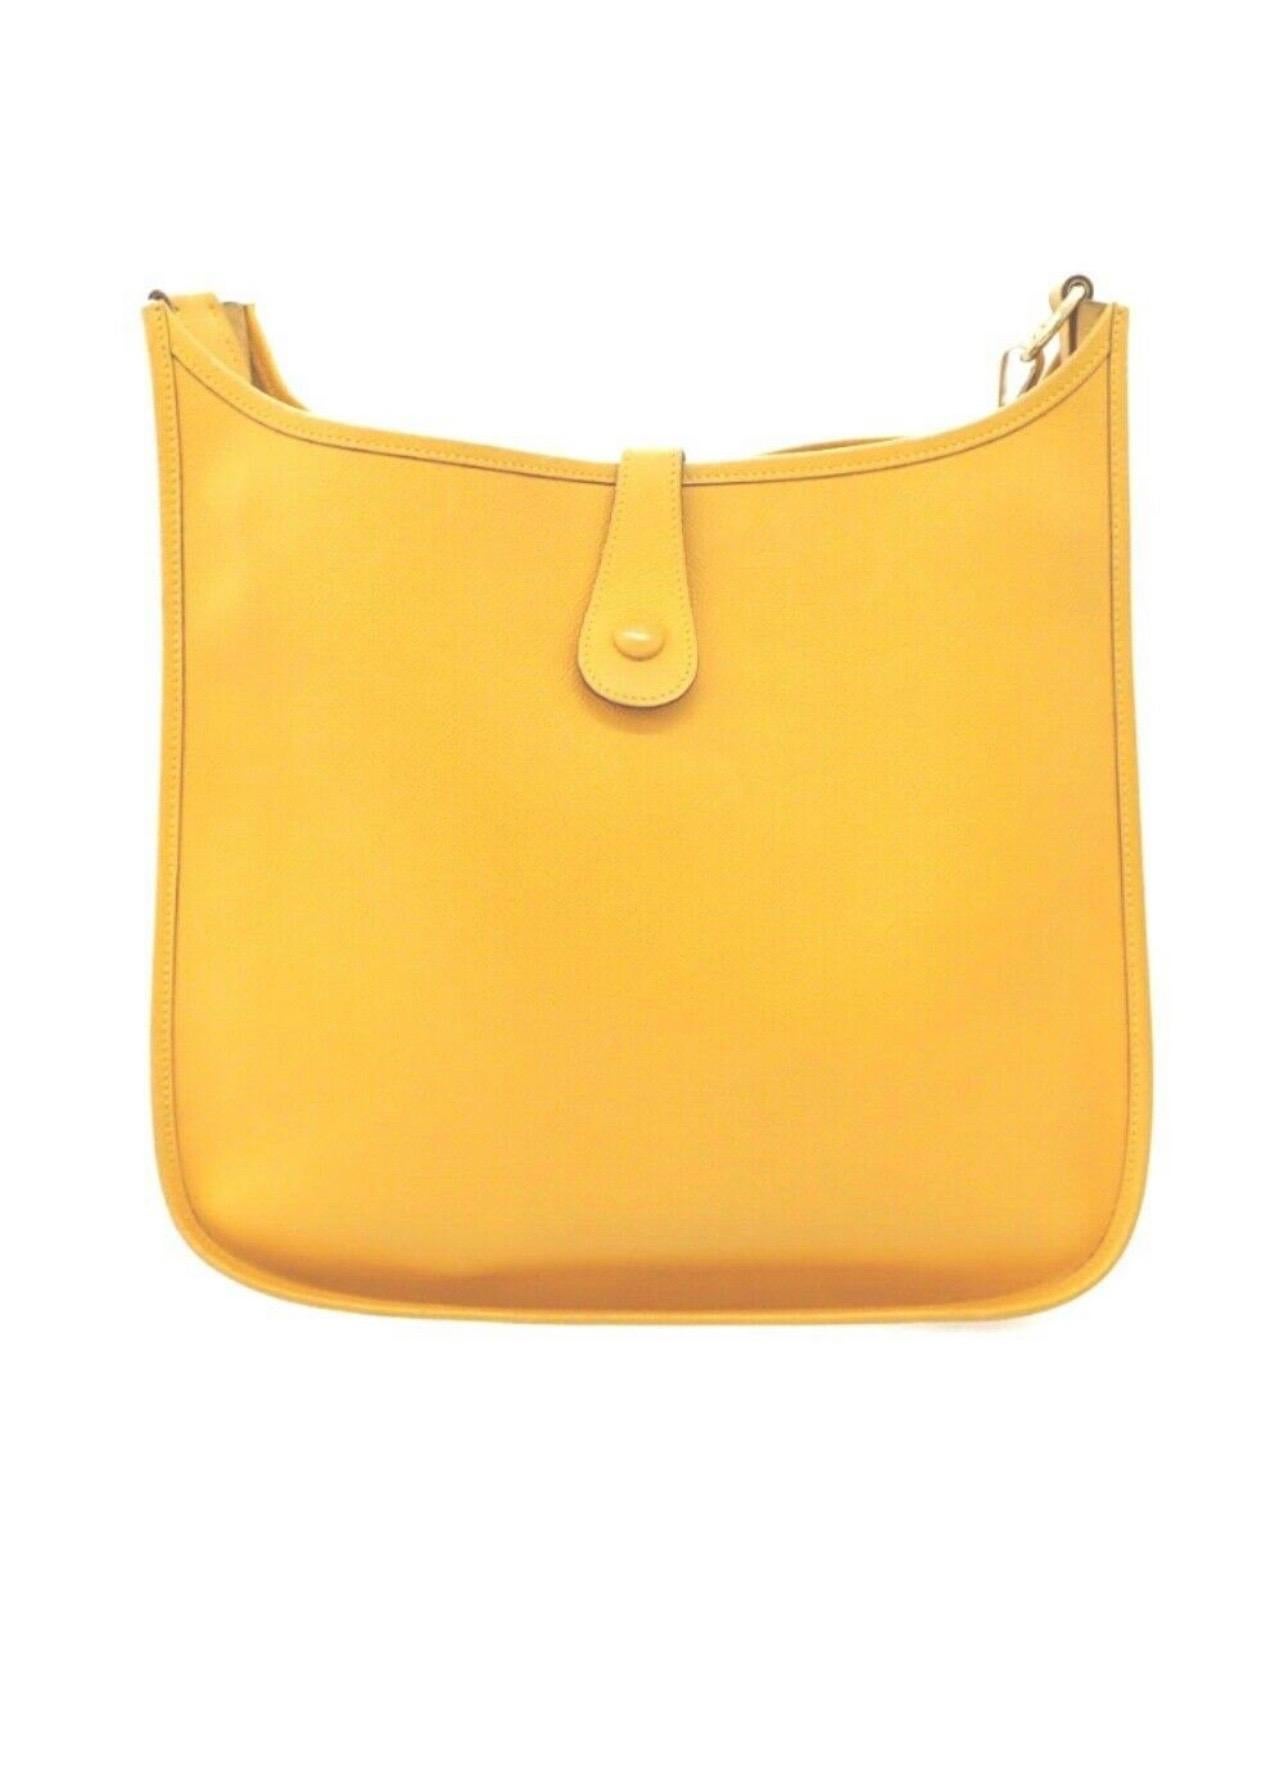 Hermès Evelyne Pm Yellow  Leather Cross Body Shoulder Bag
Cross-Body Yellow Leather Messenger Bag 
Most desirable and Convenient cross body bag
 Measurements: Height 12.4